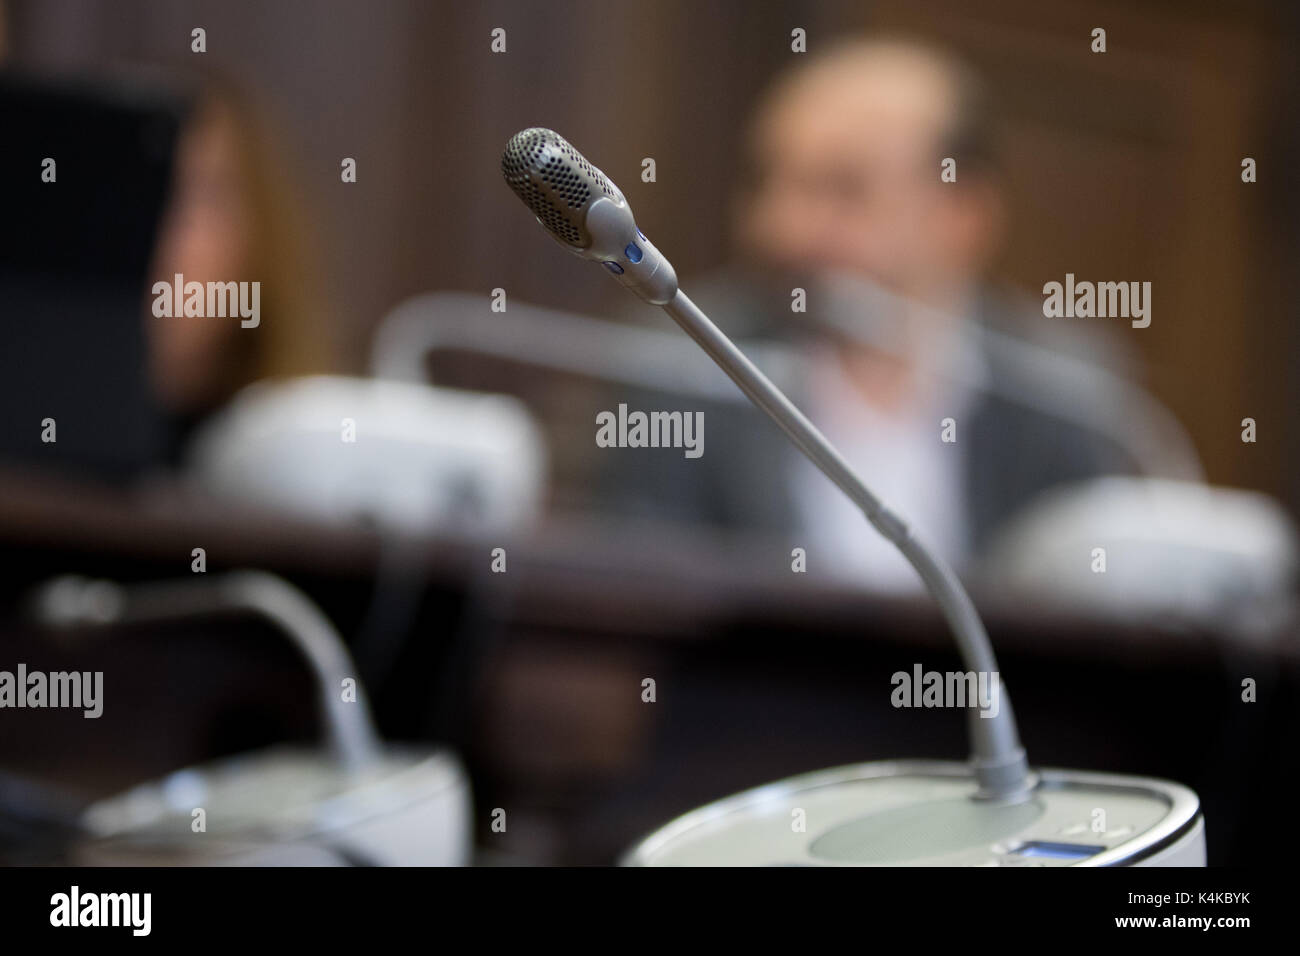 Hamburg, Germany. 7th Sep, 2017. Mehmet S., an alleged Turkish spy facing espionage charges, sits in a courtroom in Hamburg, Germany, 7 September 2017. The 32-year-old man is accused of having spied in Germany on behalf of the Turkish secret service MIT. Photo: Christian Charisius/POOL dpa/dpa/Alamy Live News Stock Photo